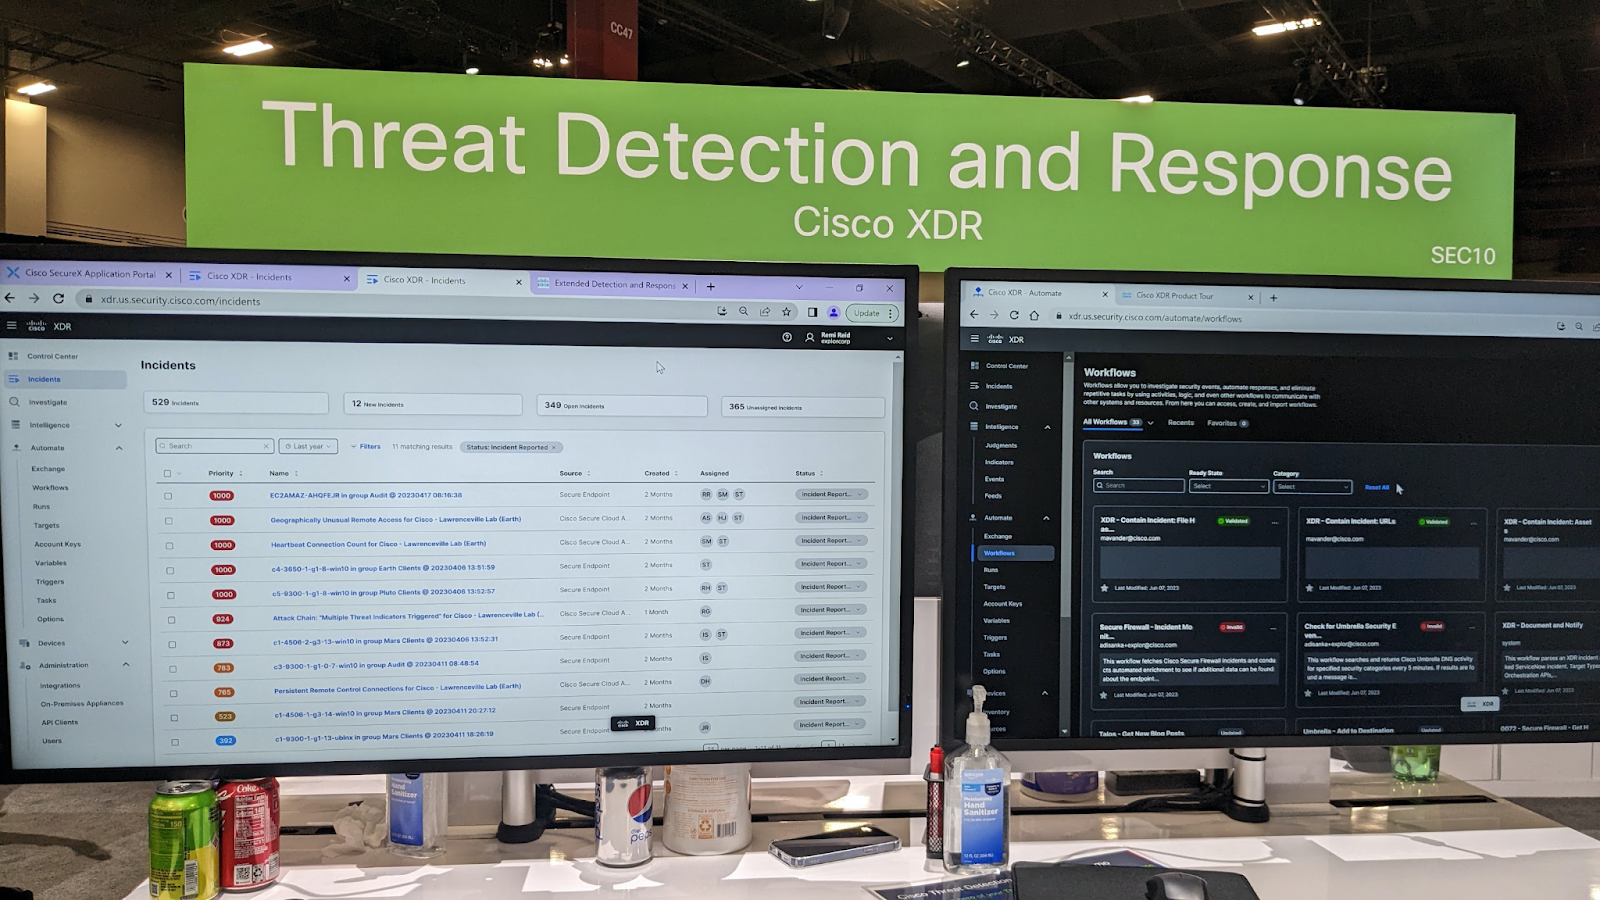 Demo of Cisco XDR ( Threat Detection and Response)